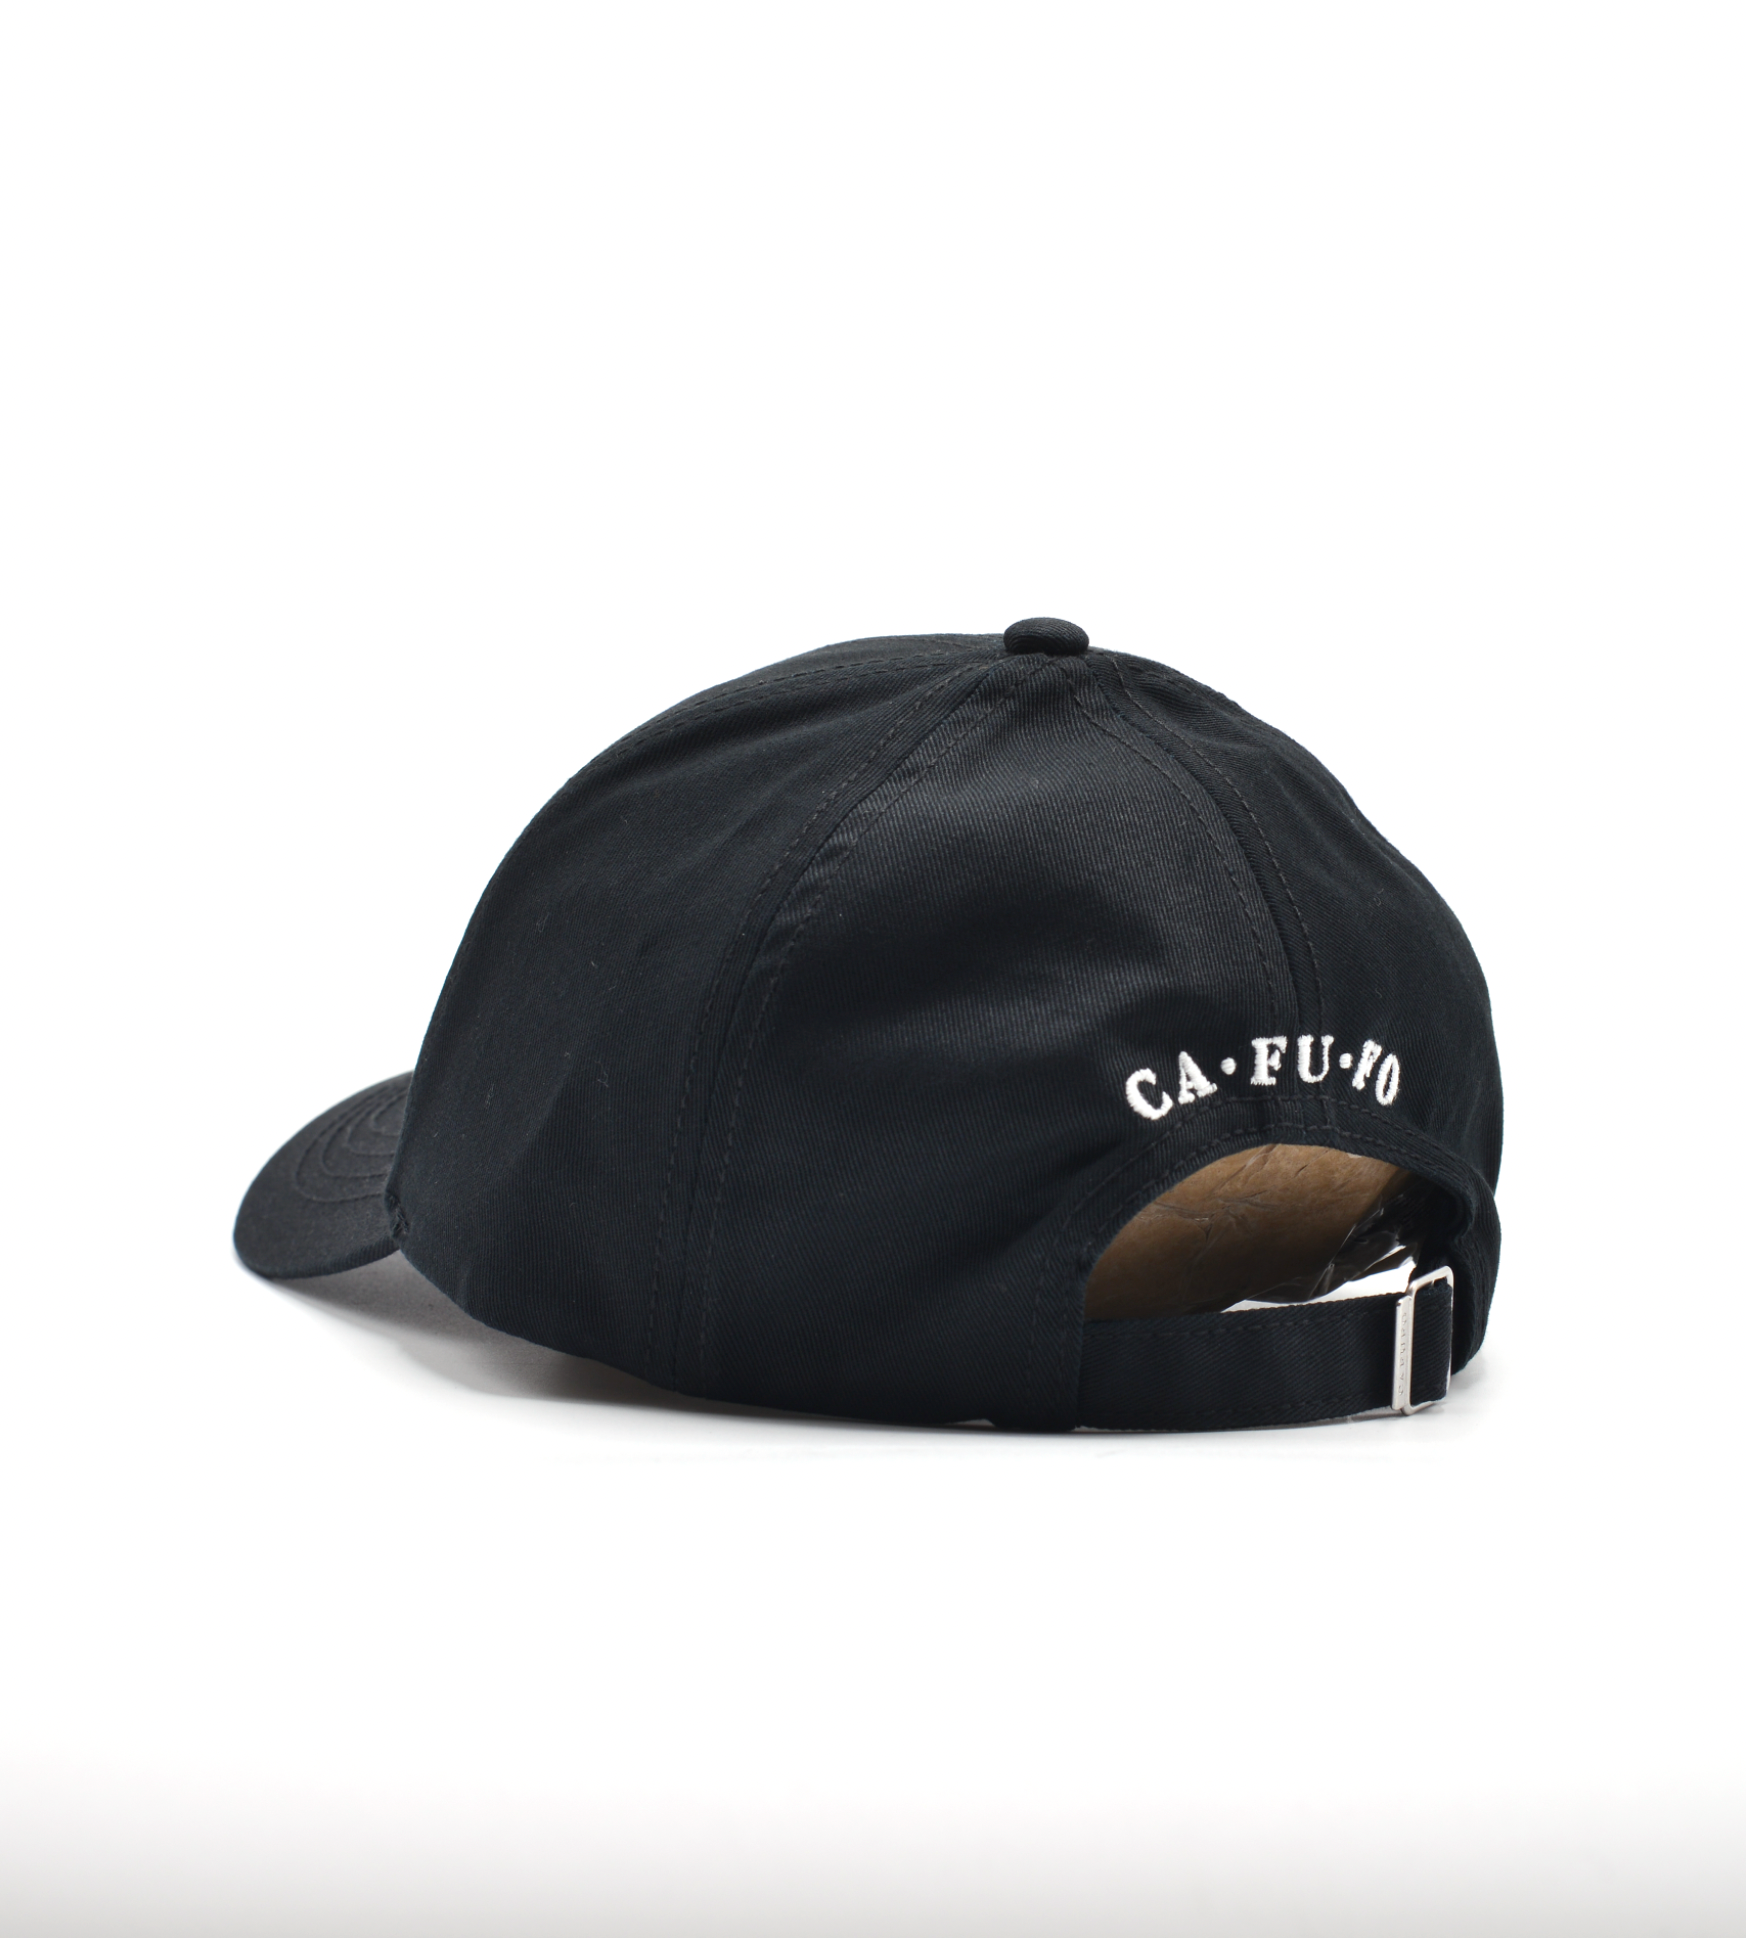 Cap with embroidered Cafufo logo "Black and white"